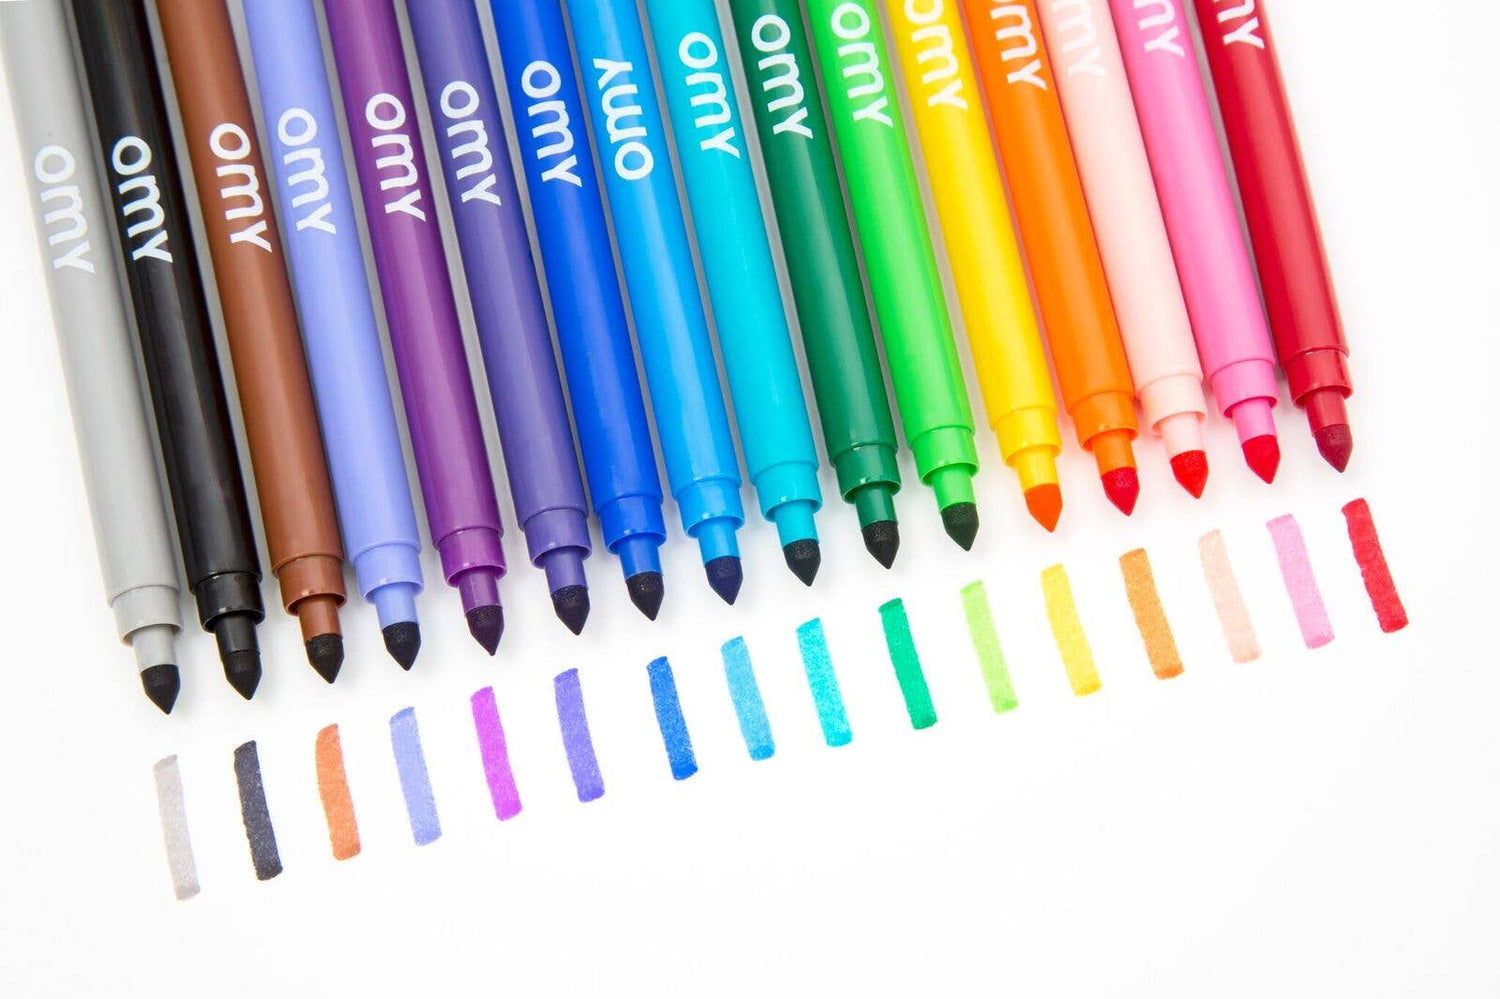 A pack of 16 different colored, double tipped (large and small) washable markers.